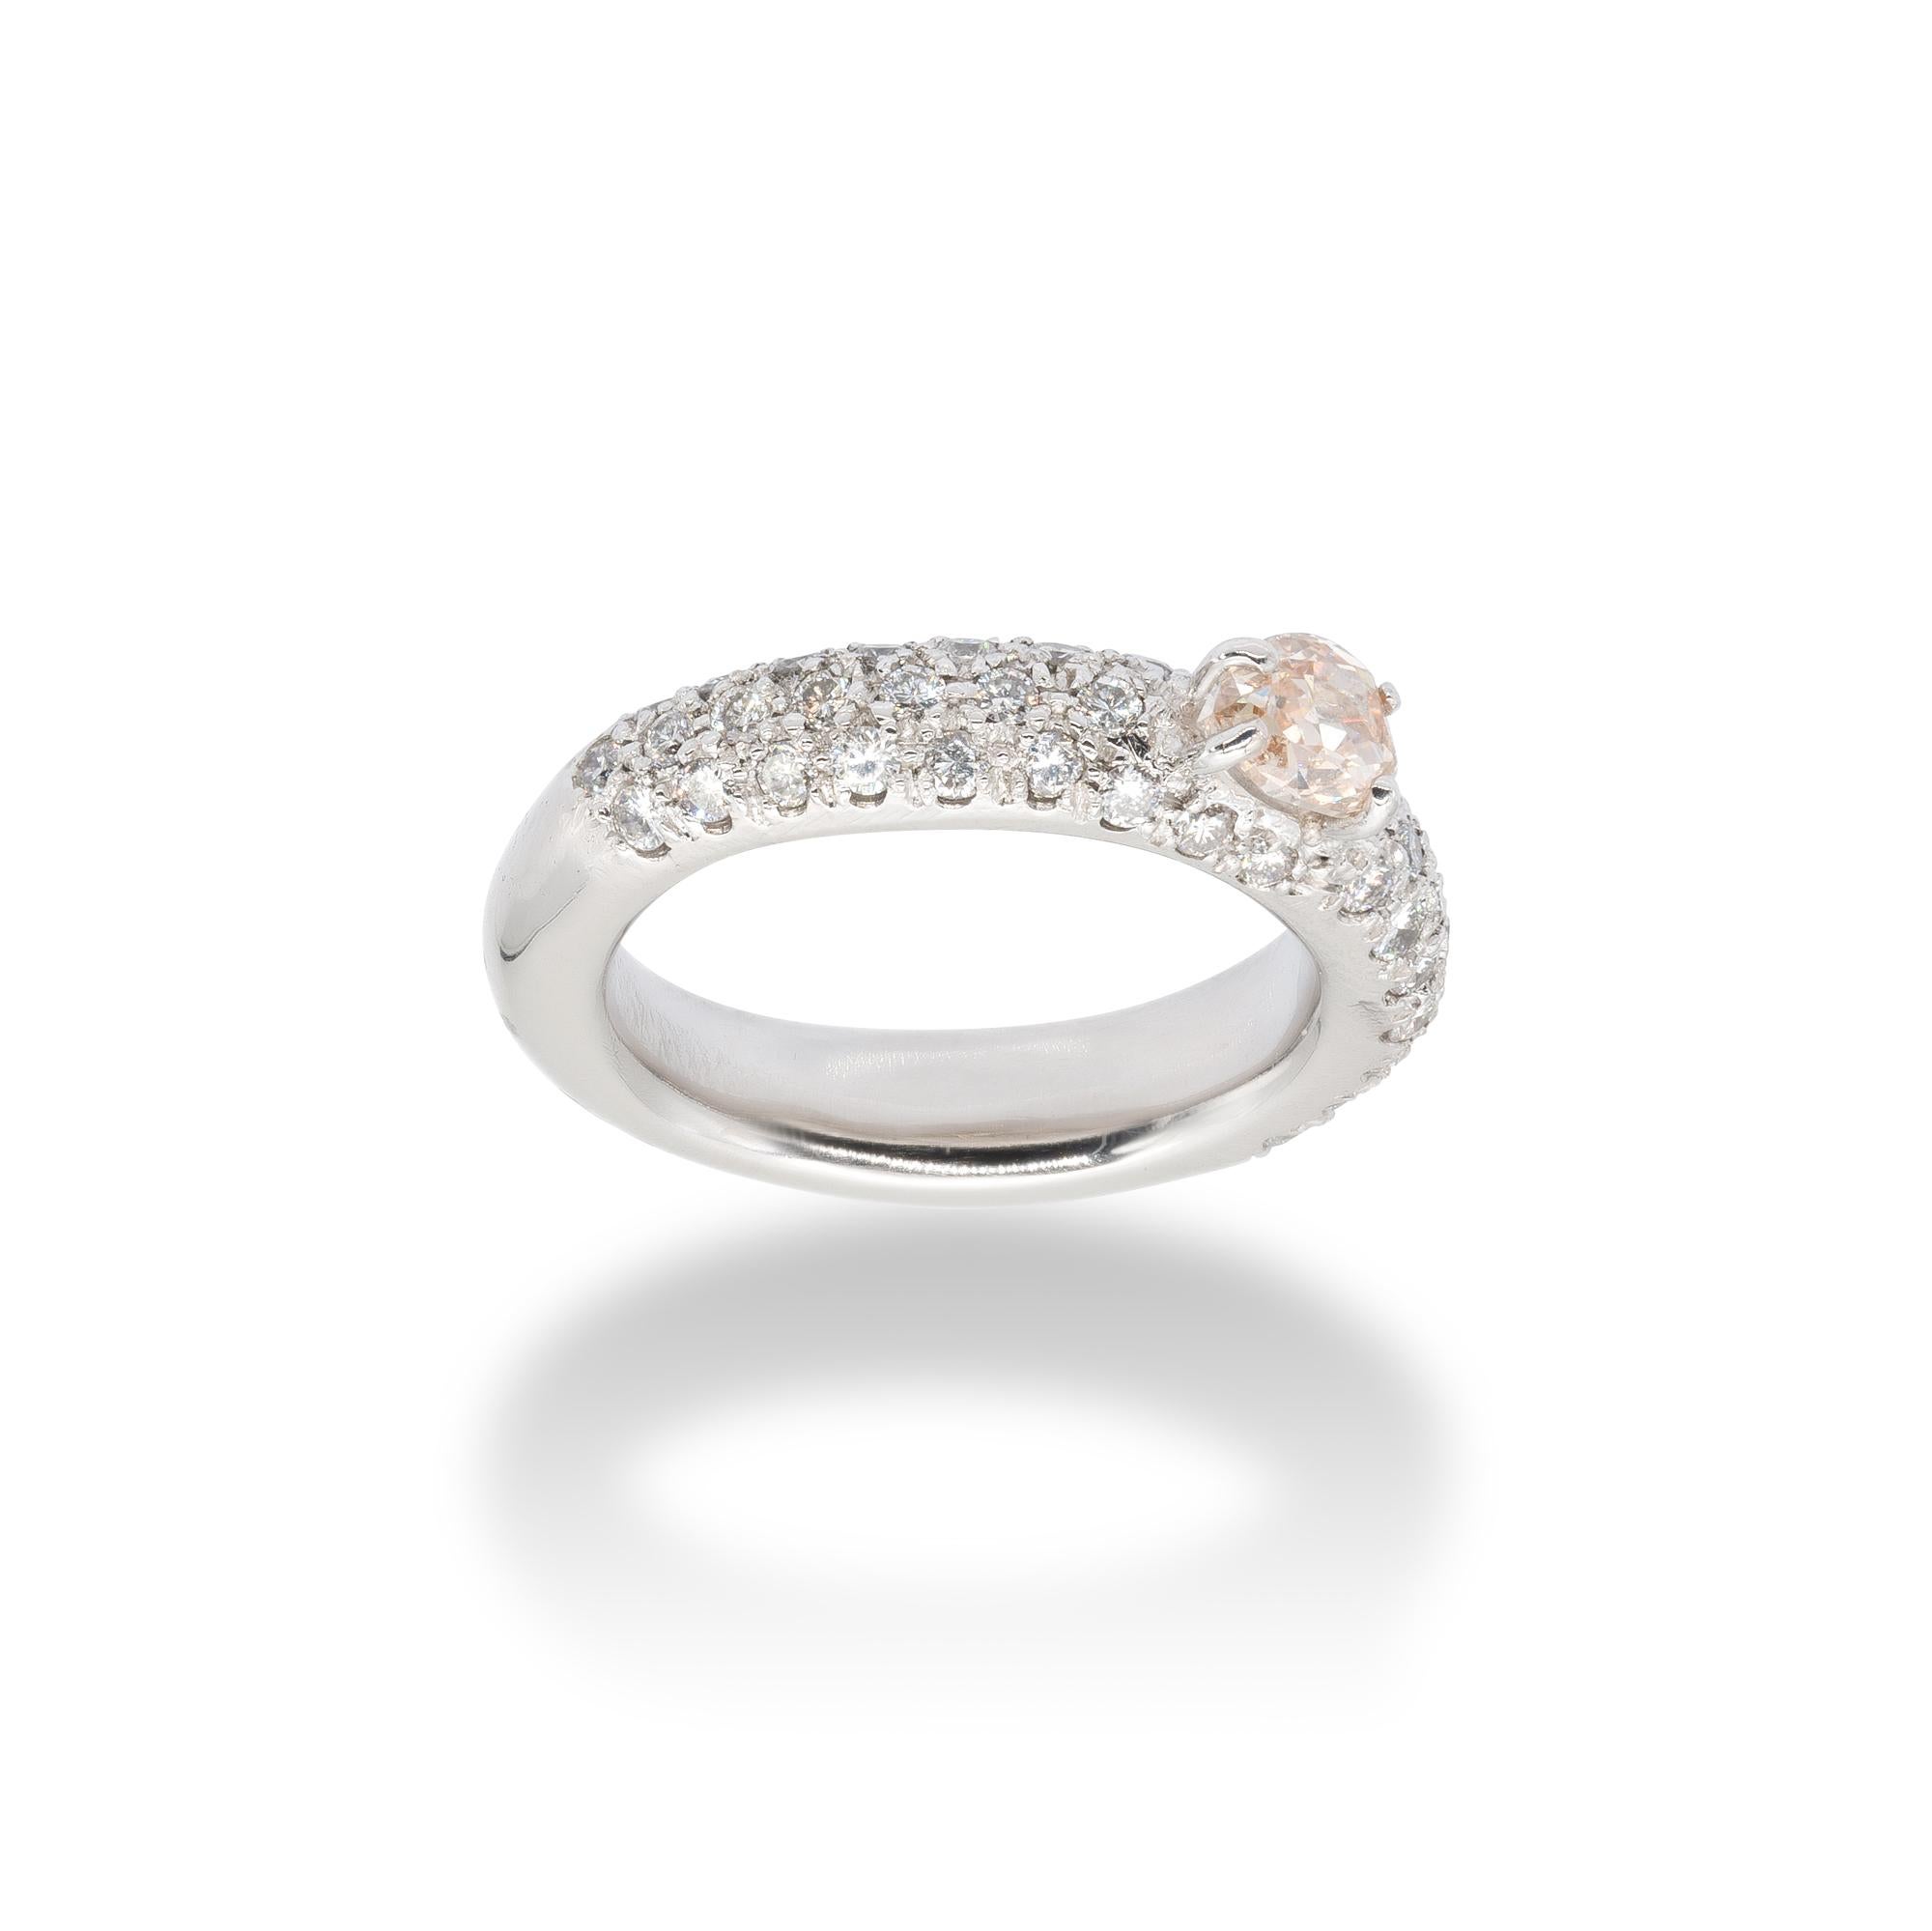 d'Avossa Sunshine Collection's Ring, 18Kt white gold with a pavé of 1.01 cts white G colour diamonds and a central 0.65 cts Fancy Natural pear-shaped Diamond.
This Ring has been designed to be worn alone, perhaps as an engagement ring, or together